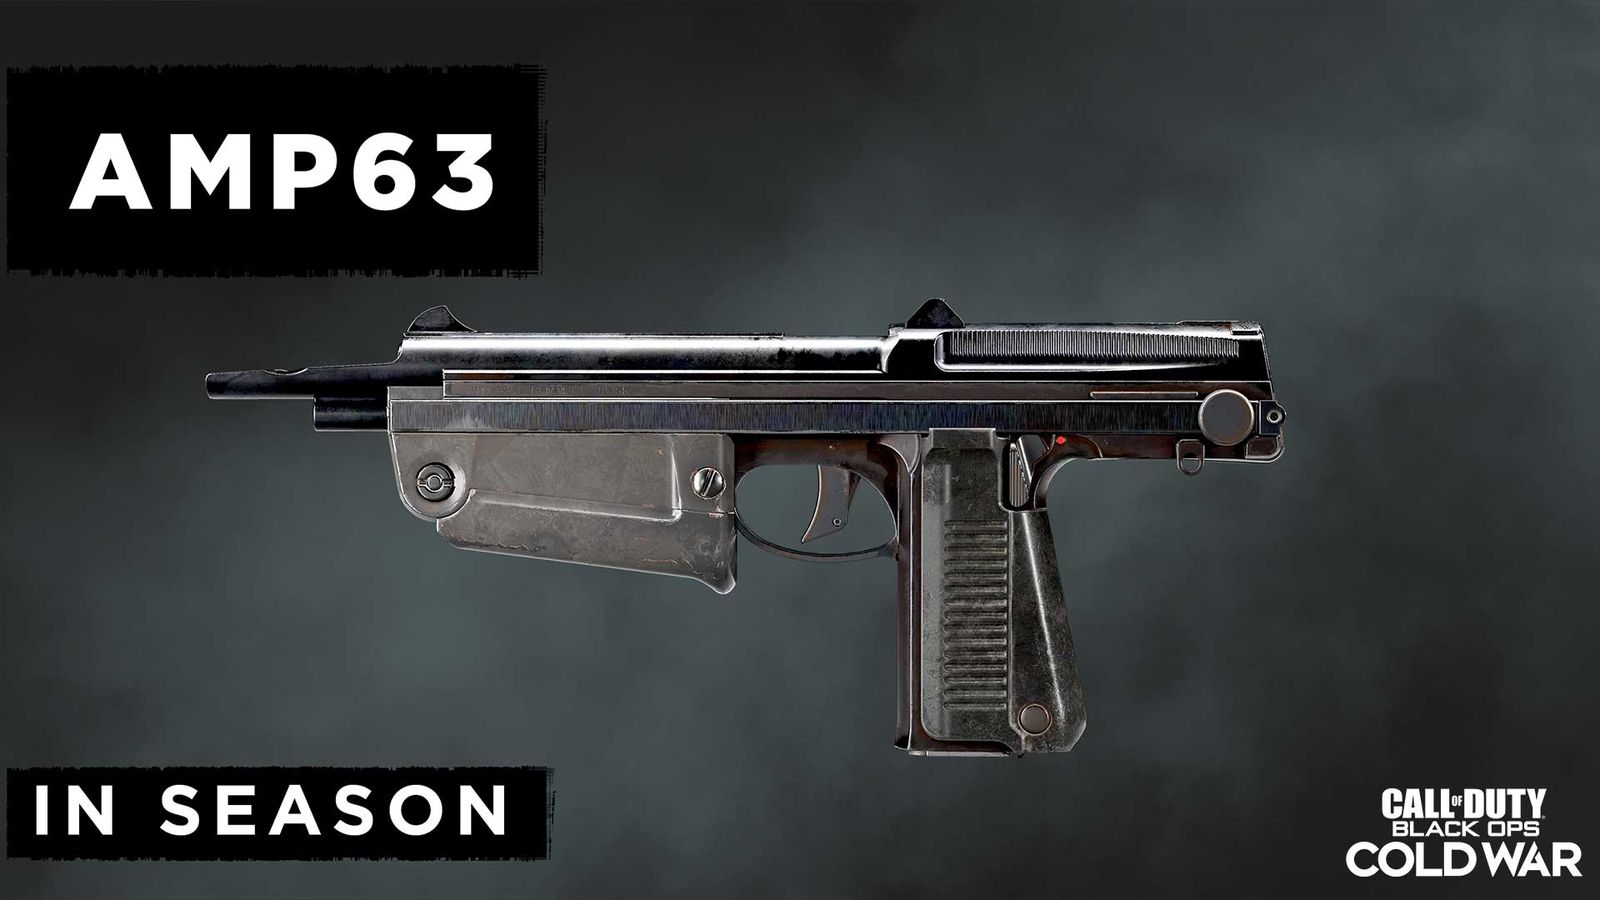 Black Ops Cold War Season 3 new Weapons AMP63 Pistol